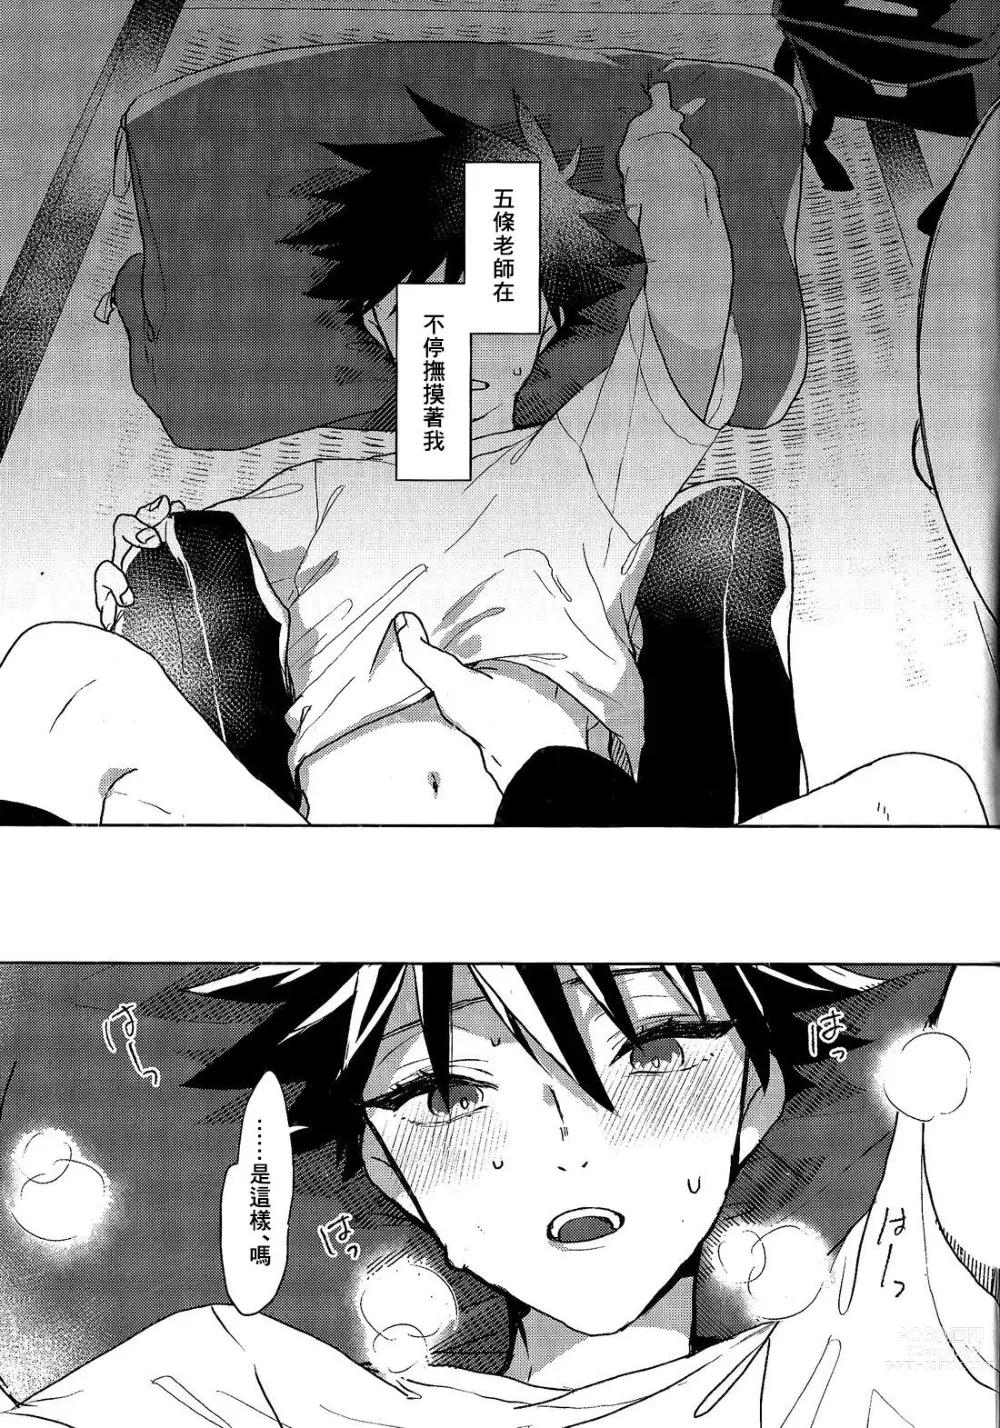 Page 5 of doujinshi Immoralist丨背德者